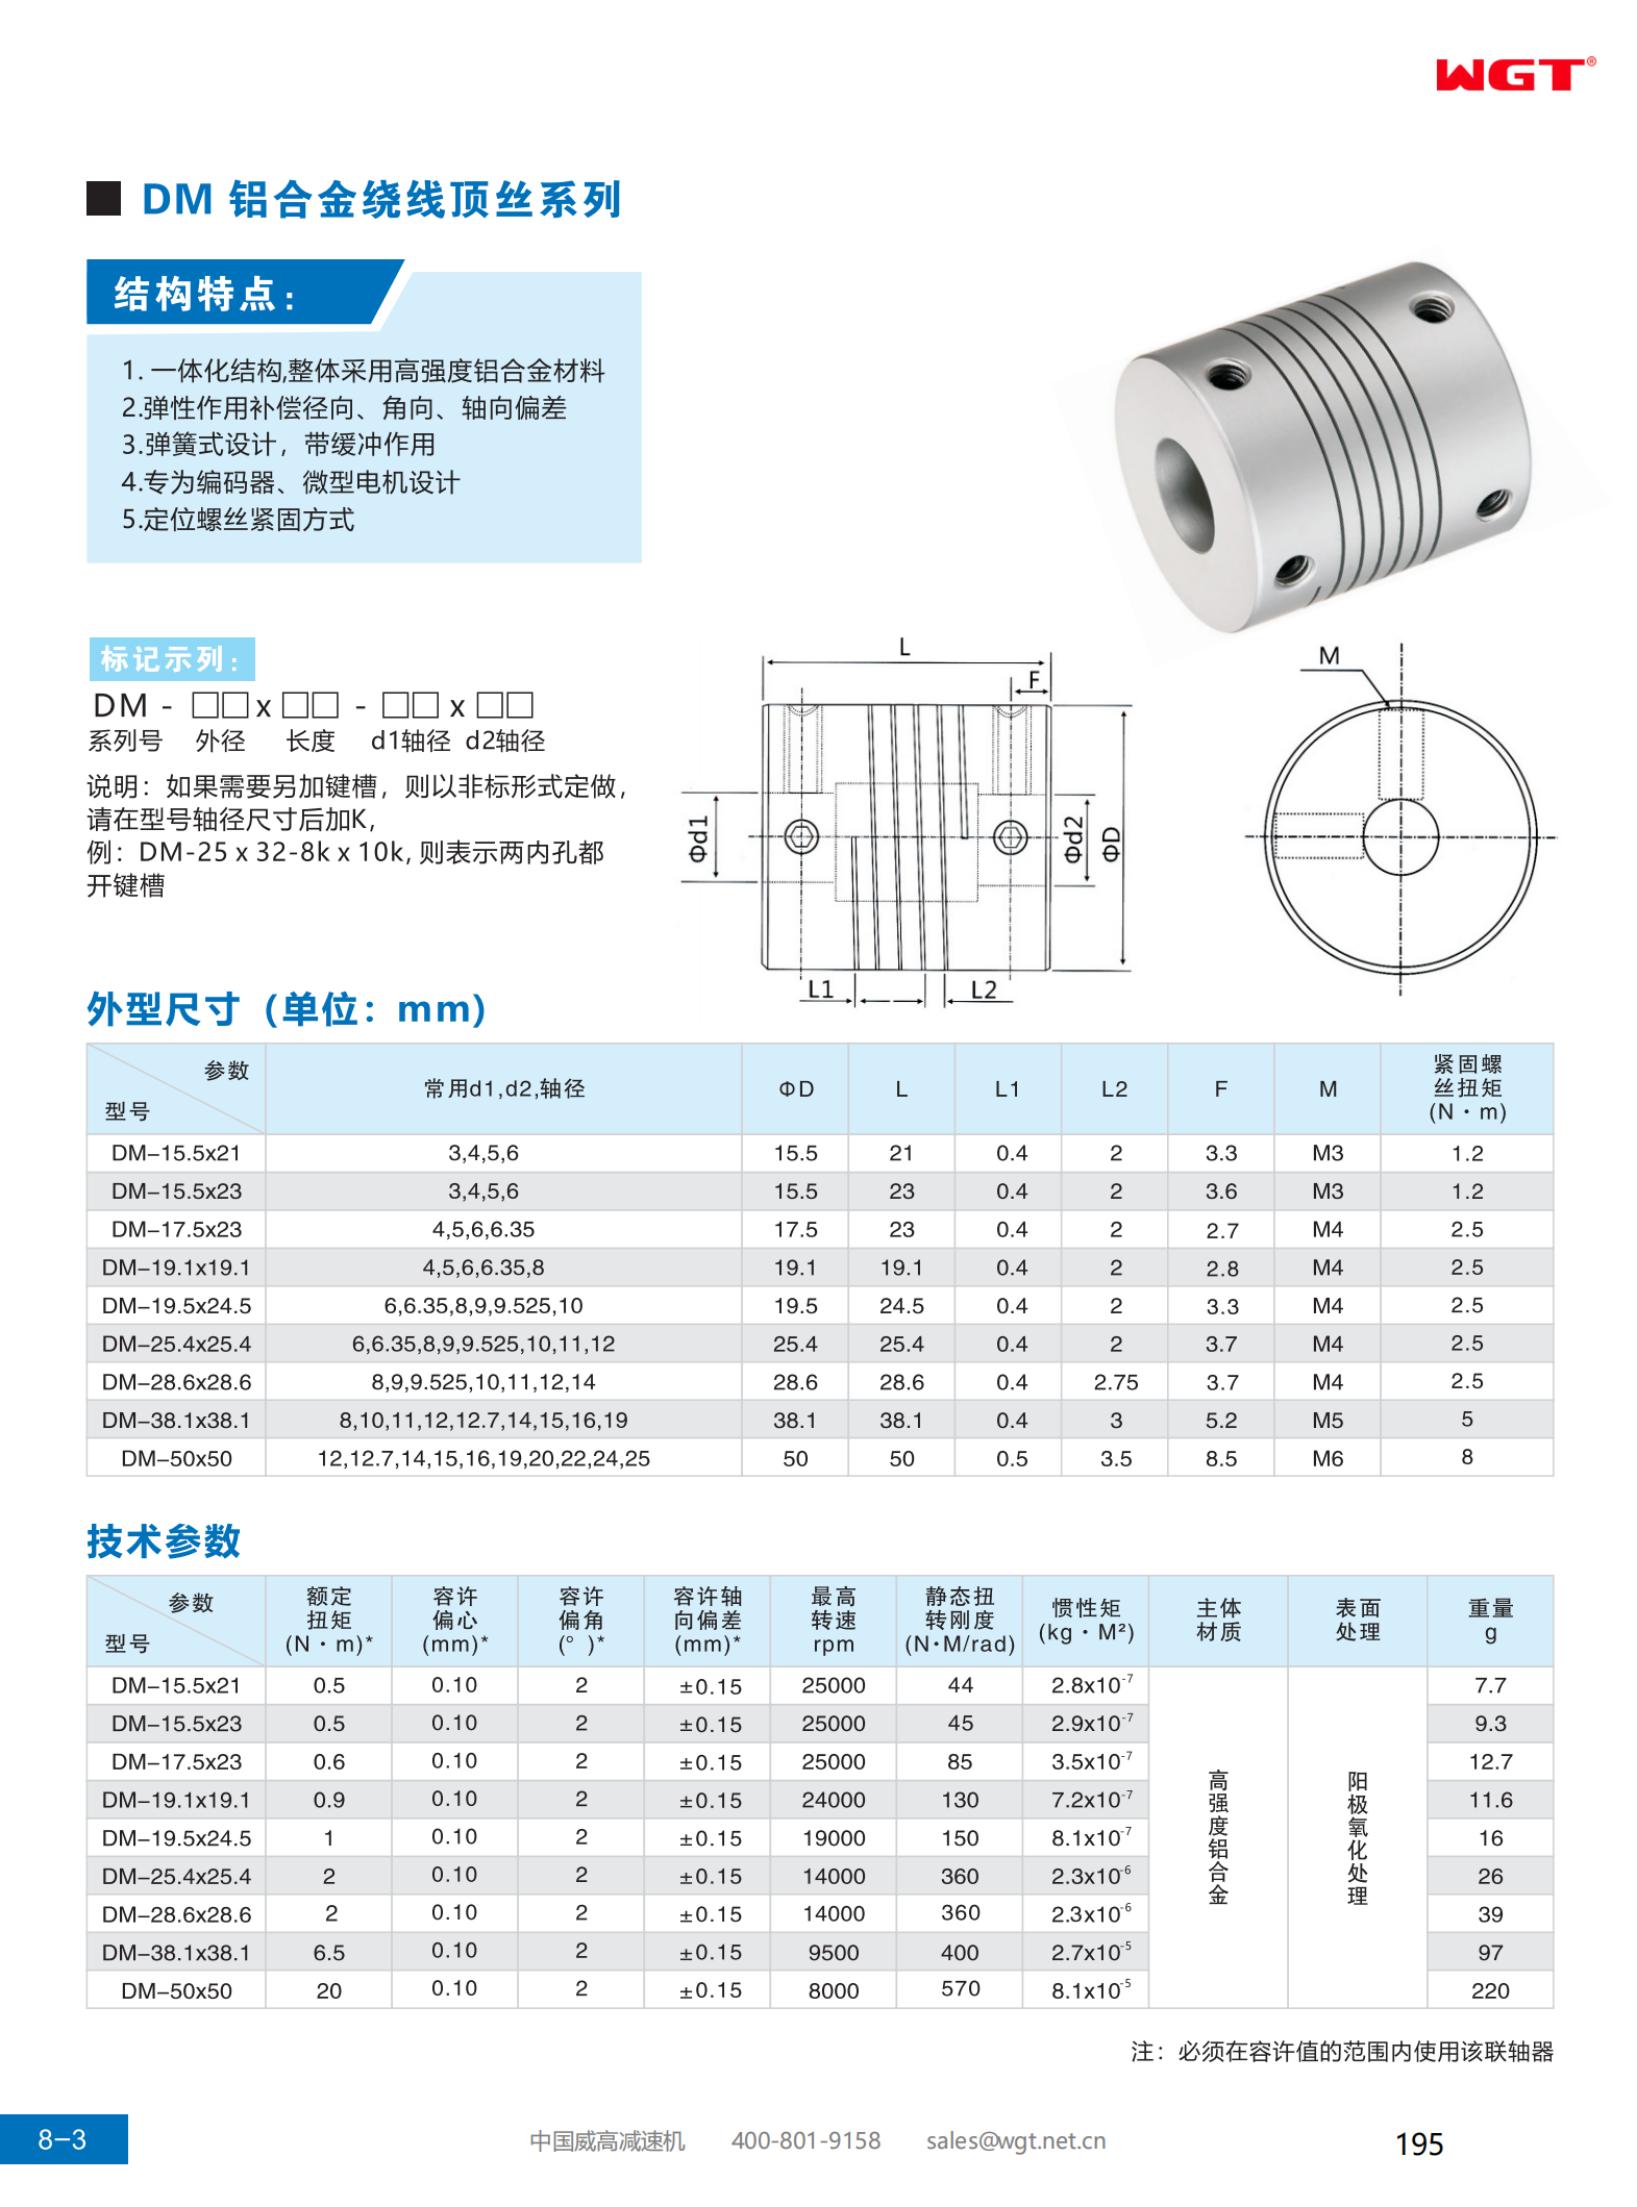 DM aluminum alloy wire winding top wire series